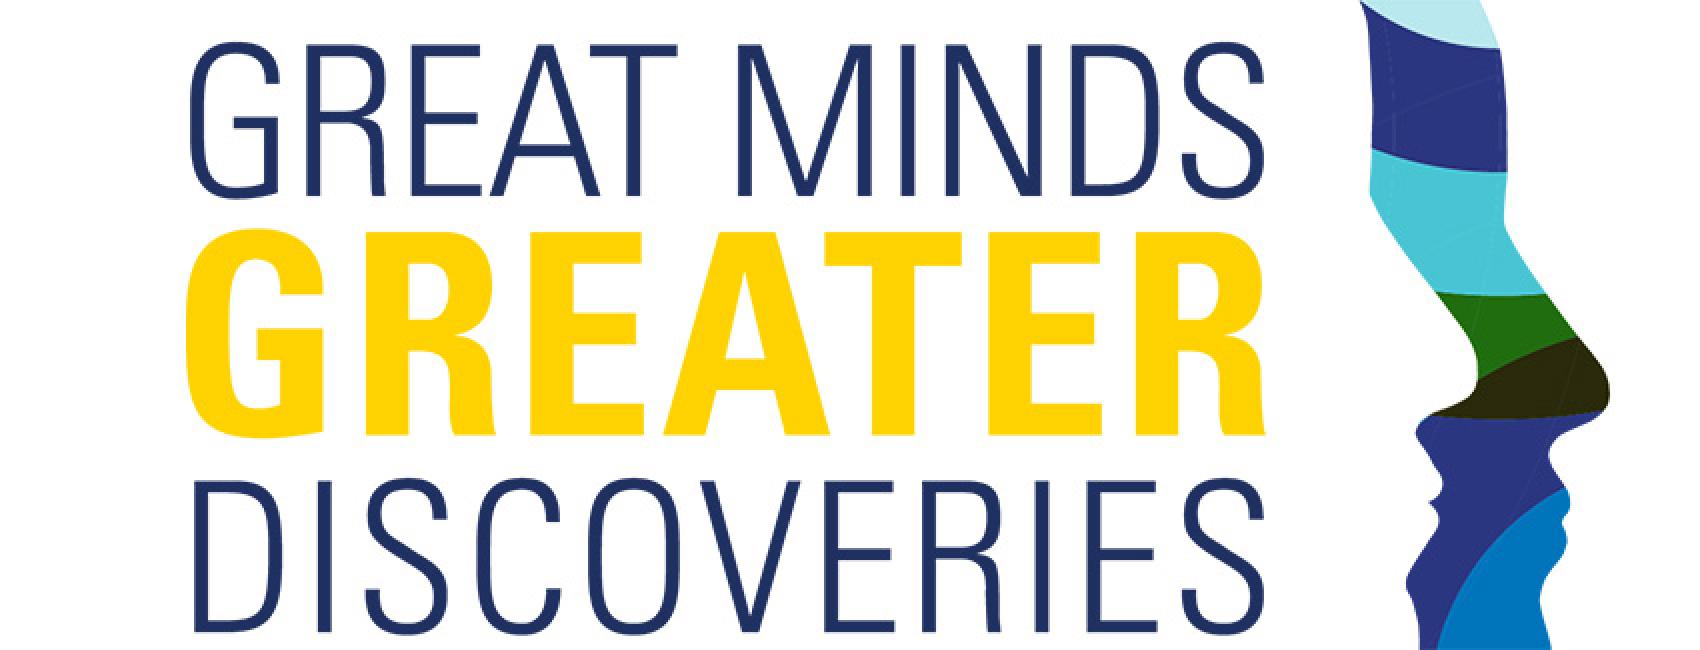 Great Minds, Greater Discoveries logo